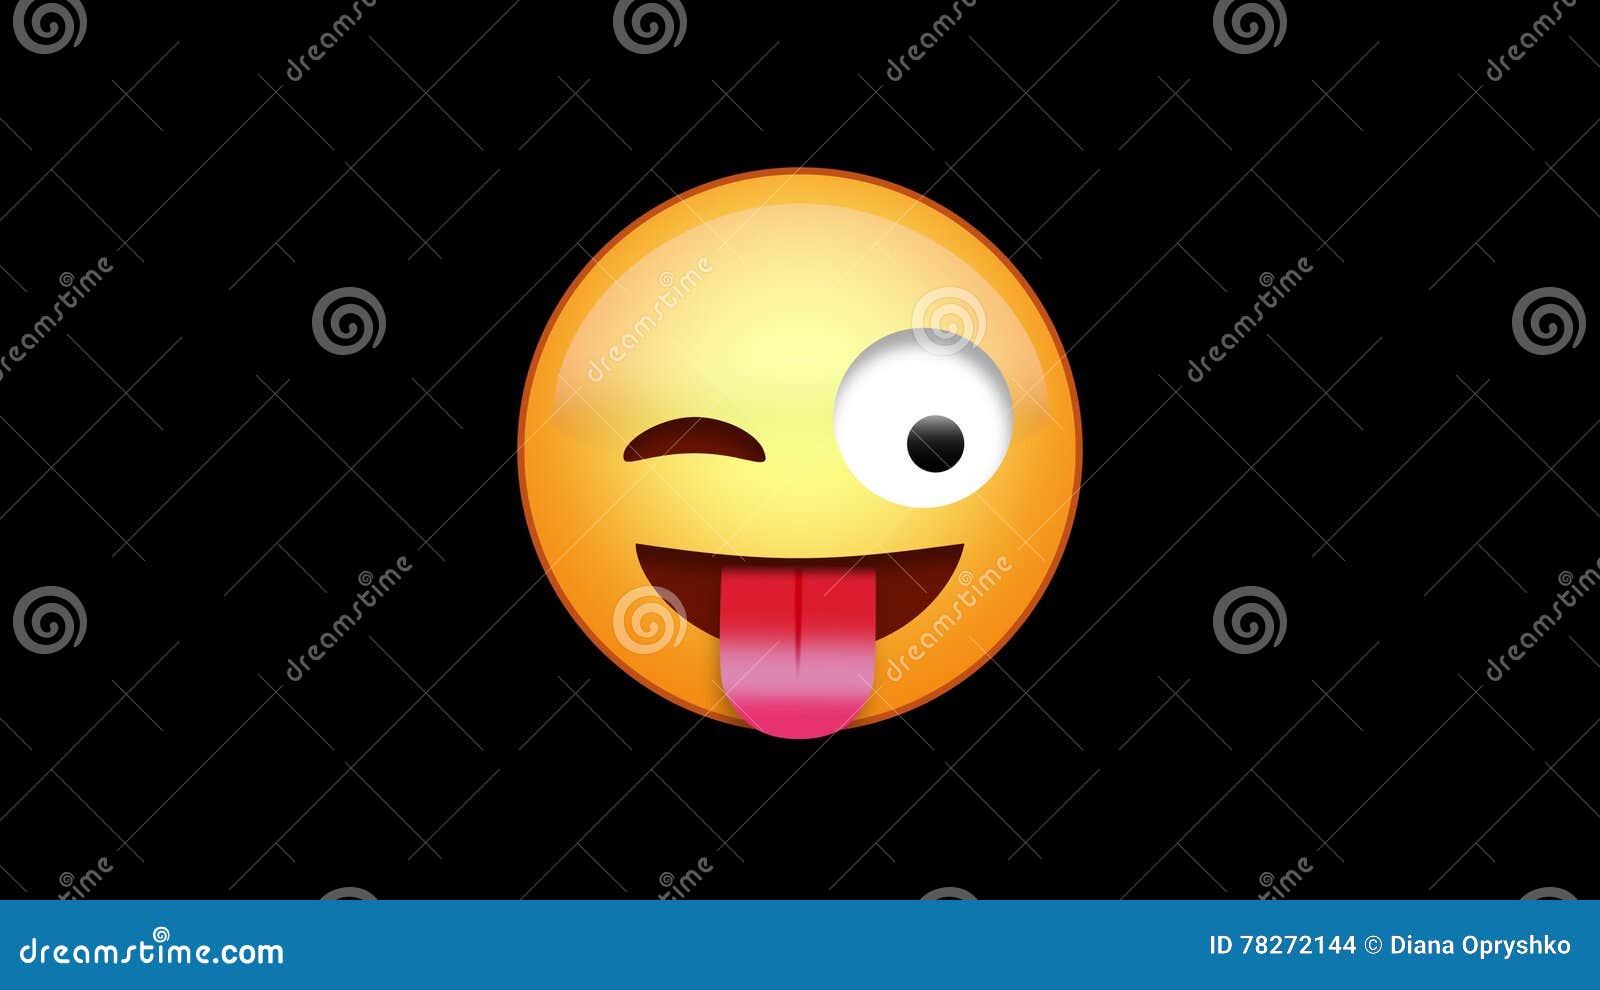 Crazy Emoji Animated Loops with Alpha Channel Stock Footage - Video of  background, digital: 78272144